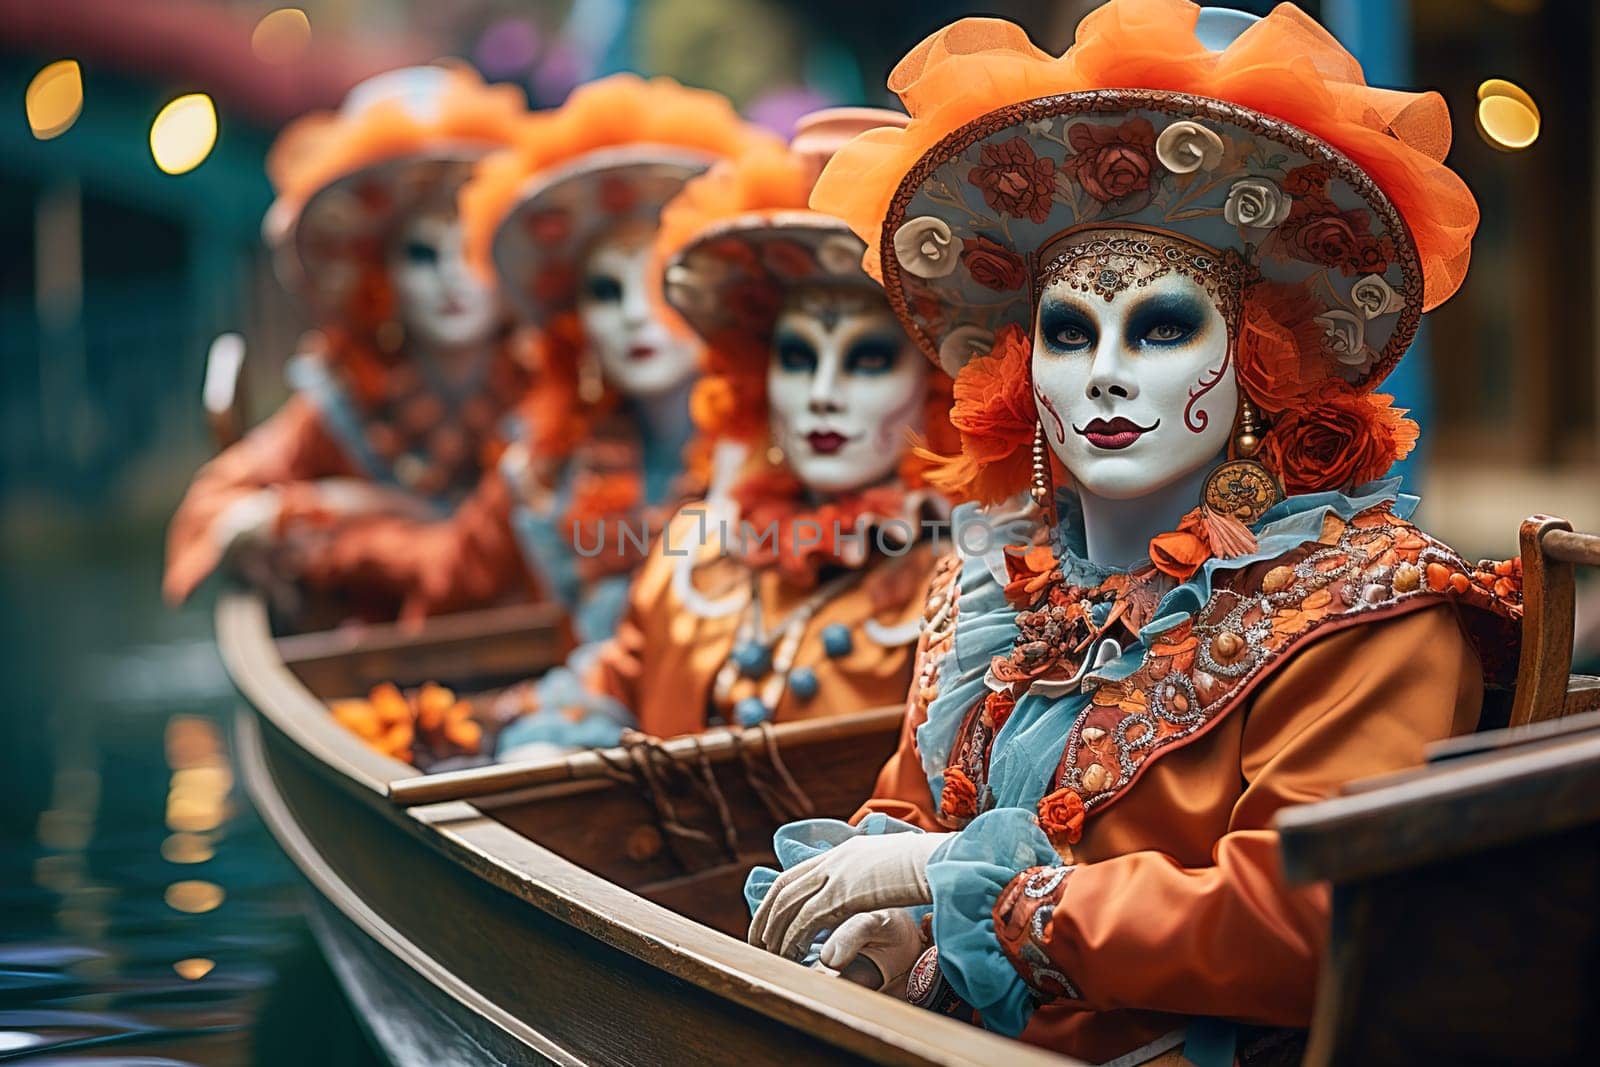 People in fancy dress and masks ride a gondola at the Venice Carnival. by Yurich32